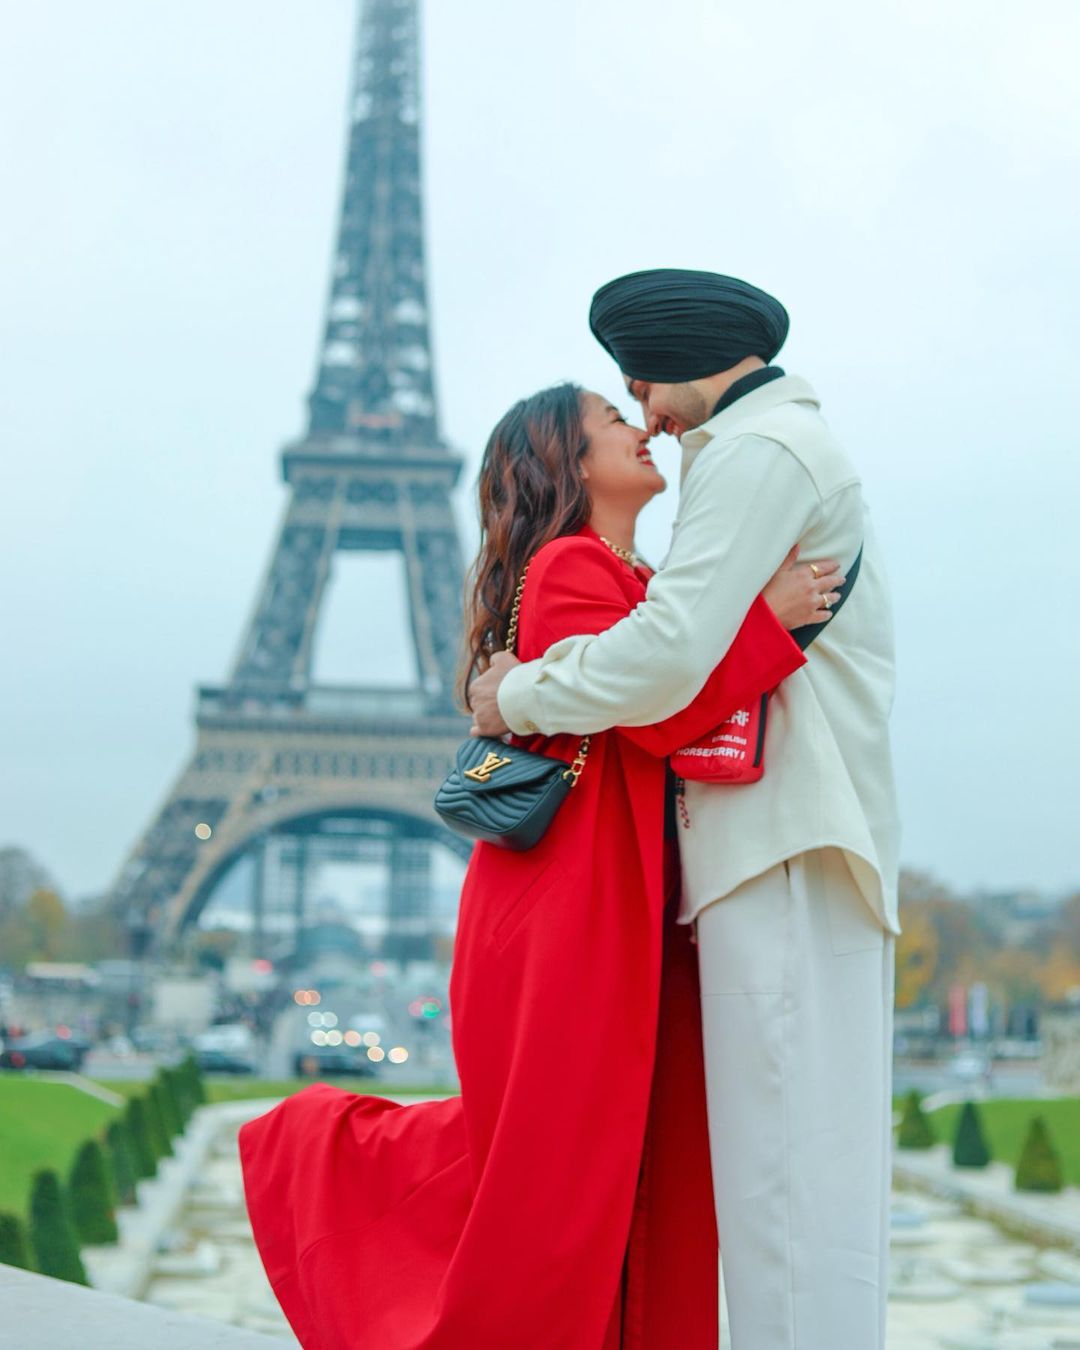 Neha Kakkar kissed her husband at these places including Paris, see unseen pictures 5013